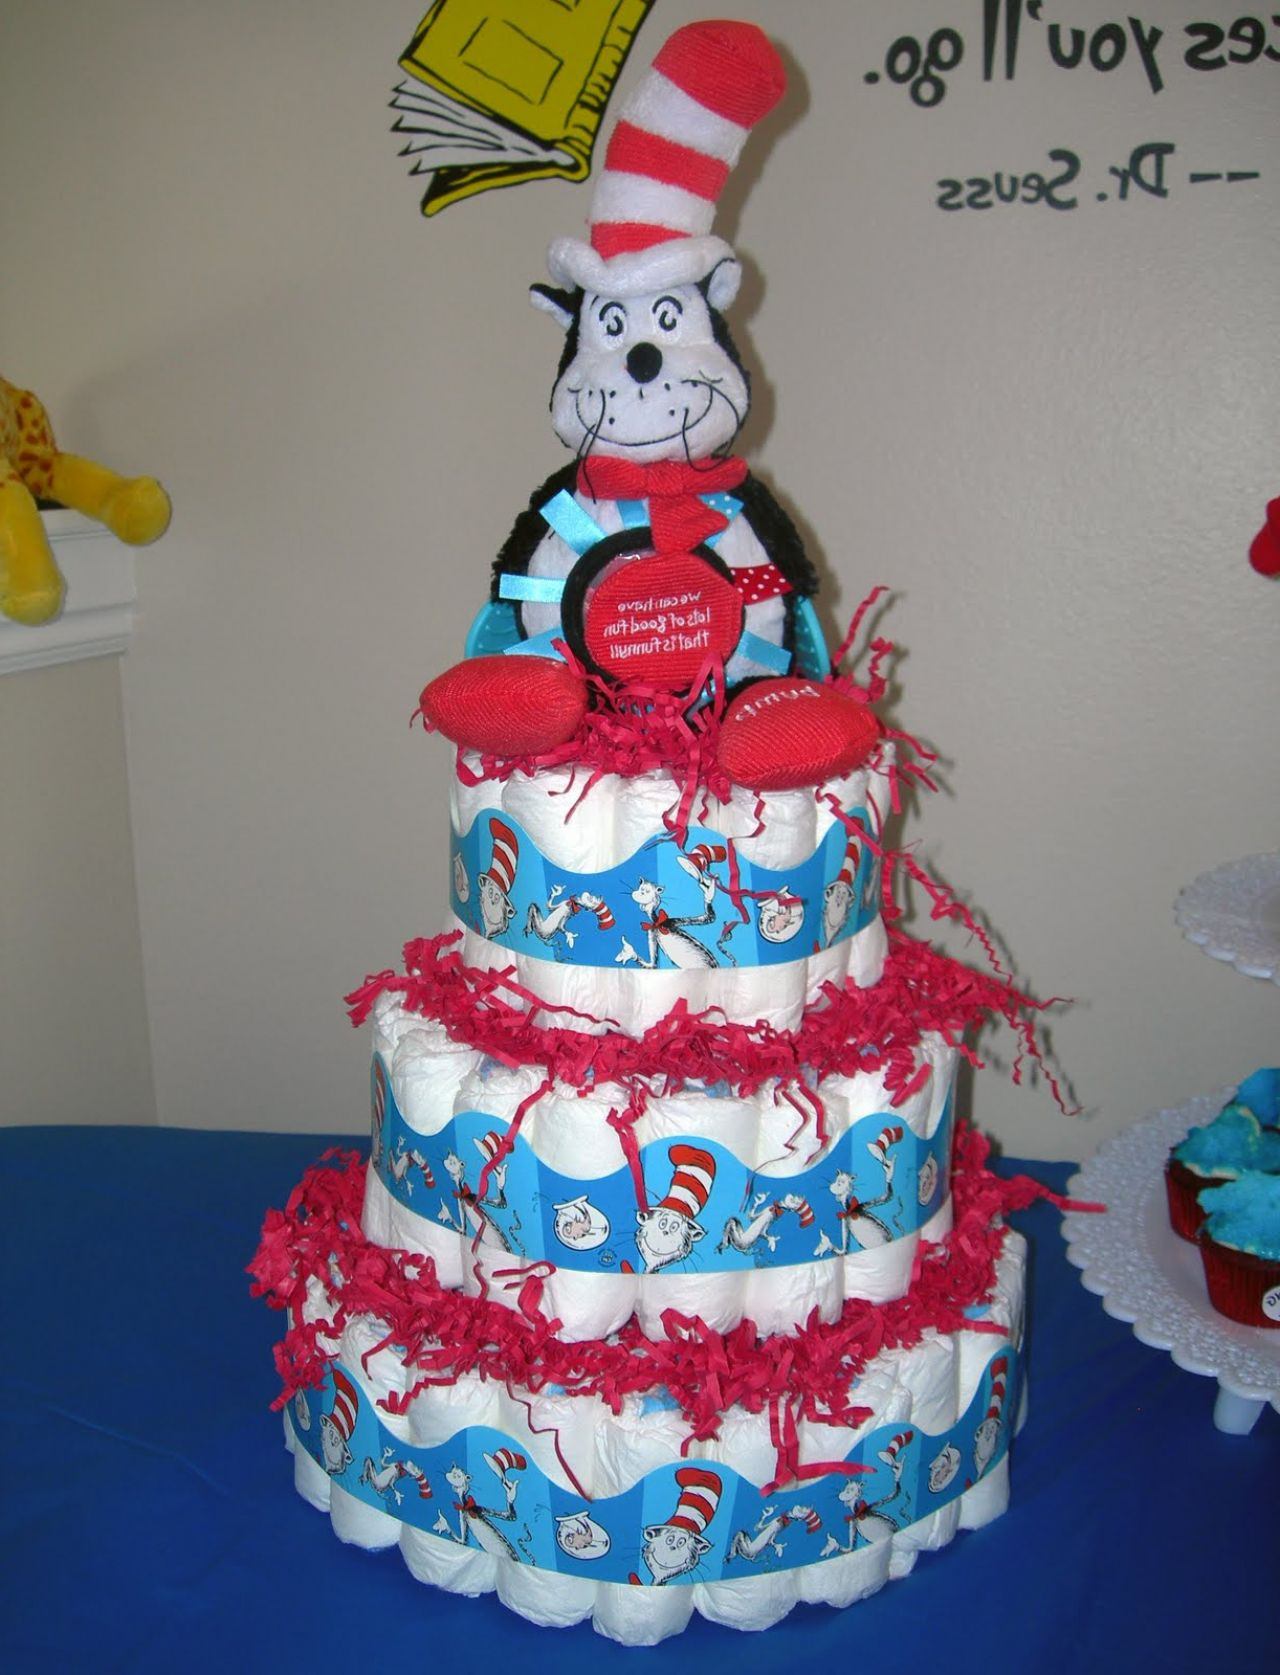 Dr.Seuss Baby Shower Gifts
 Dr Seuss Baby Shower